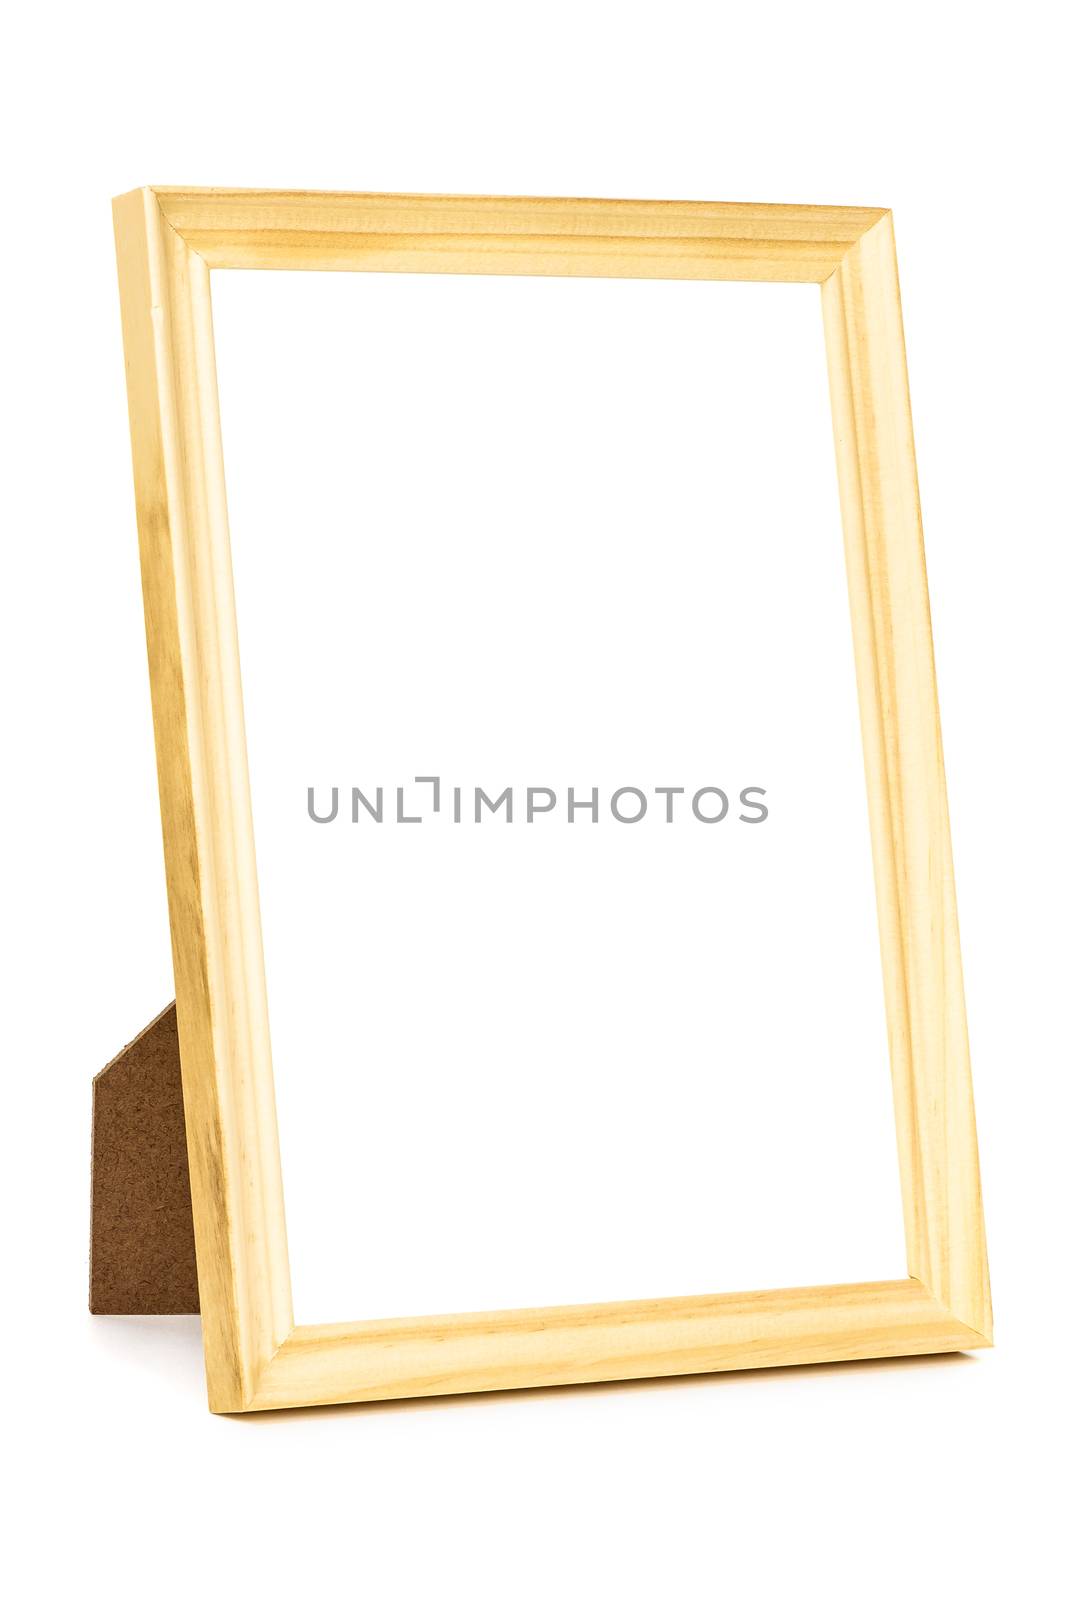 Standing wooden picture frame on white background by mkos83